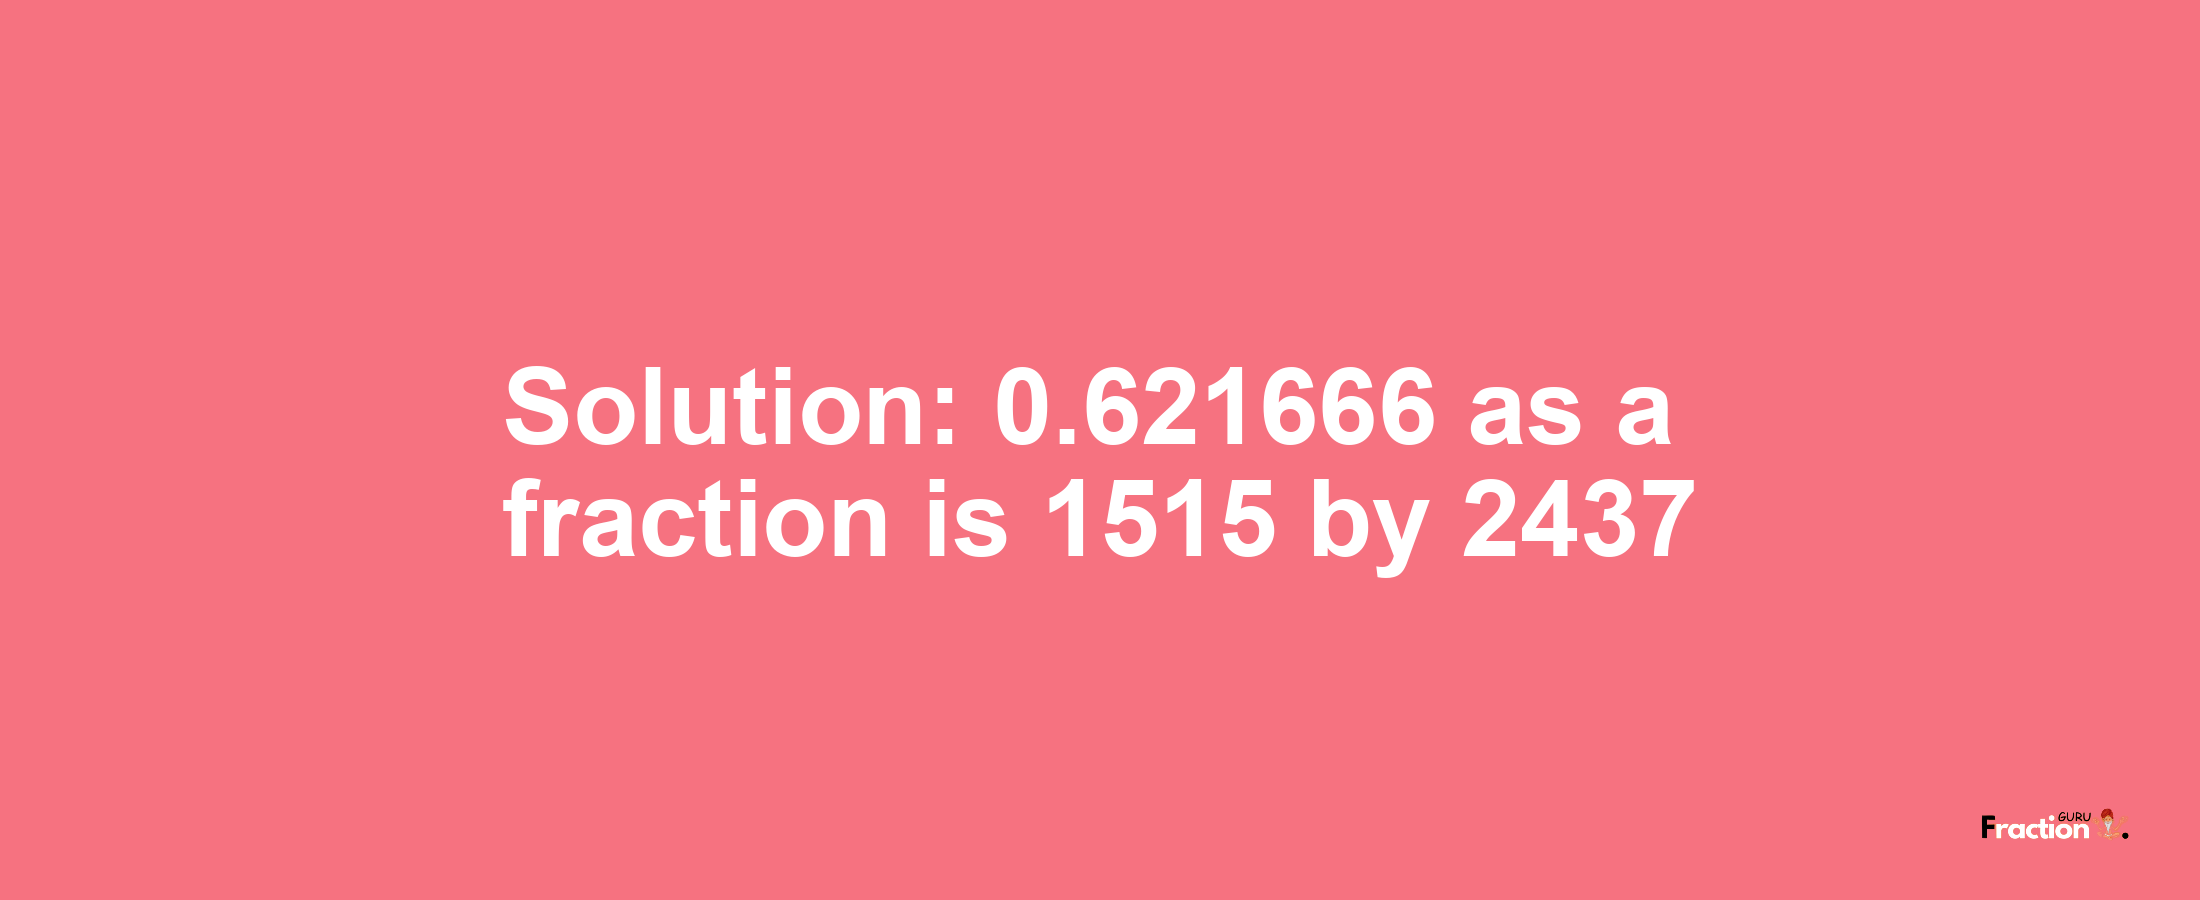 Solution:0.621666 as a fraction is 1515/2437